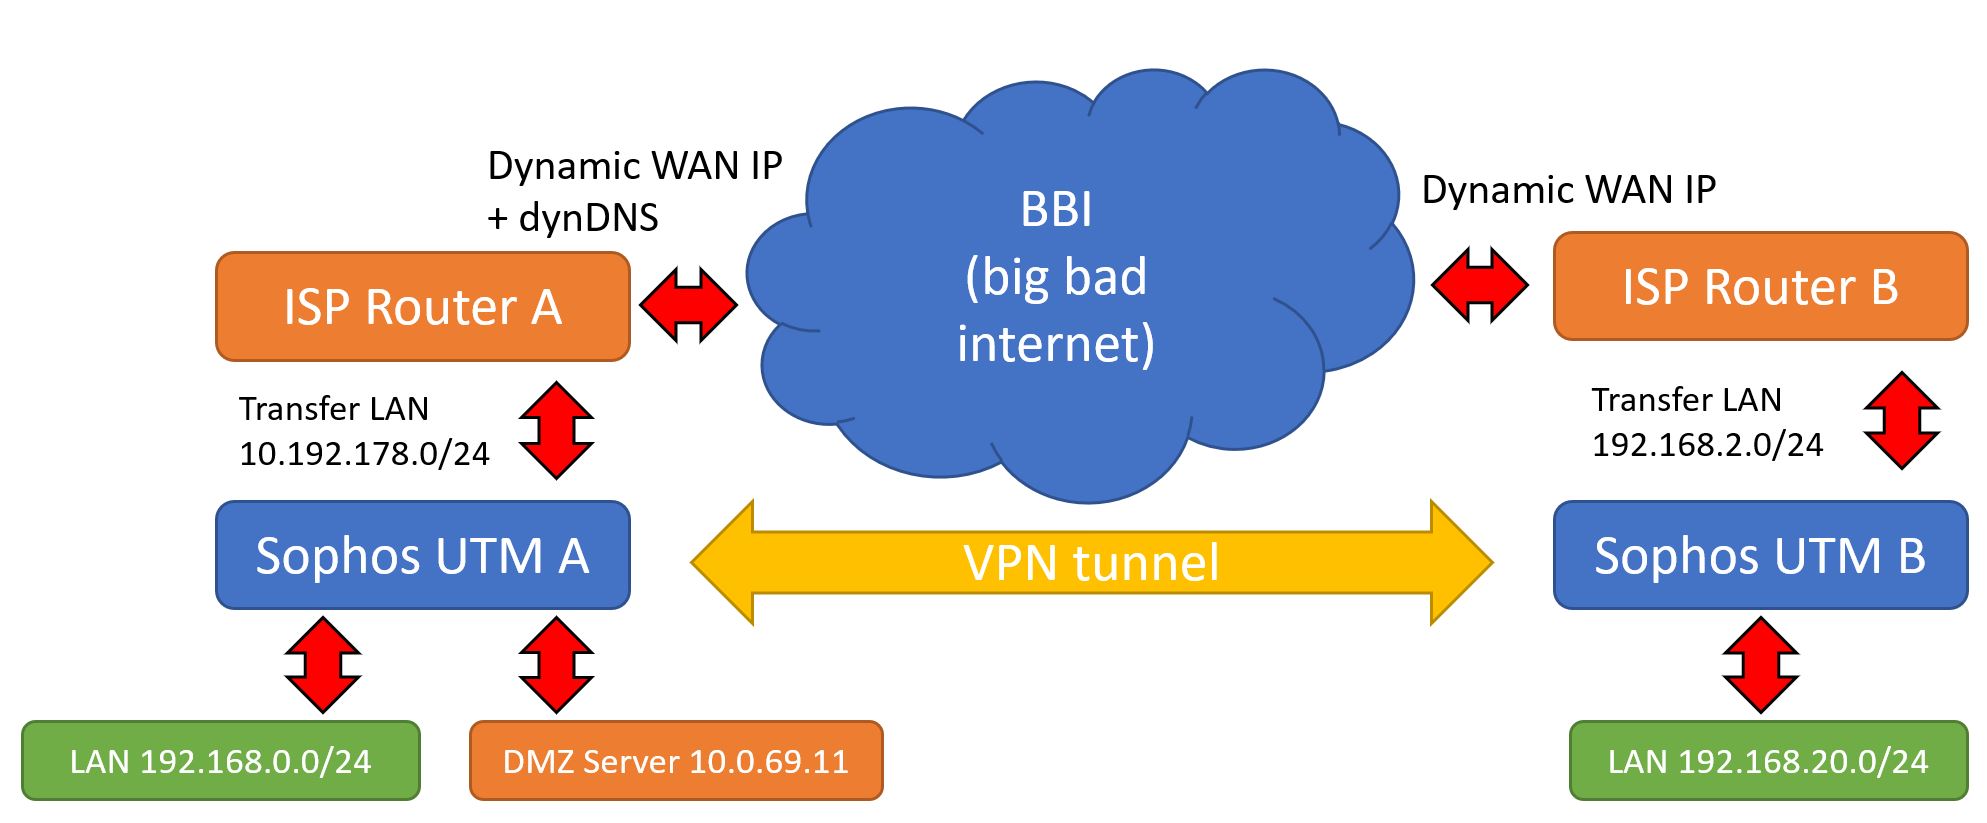 checkpoint utm-1 site to site vpn configuration